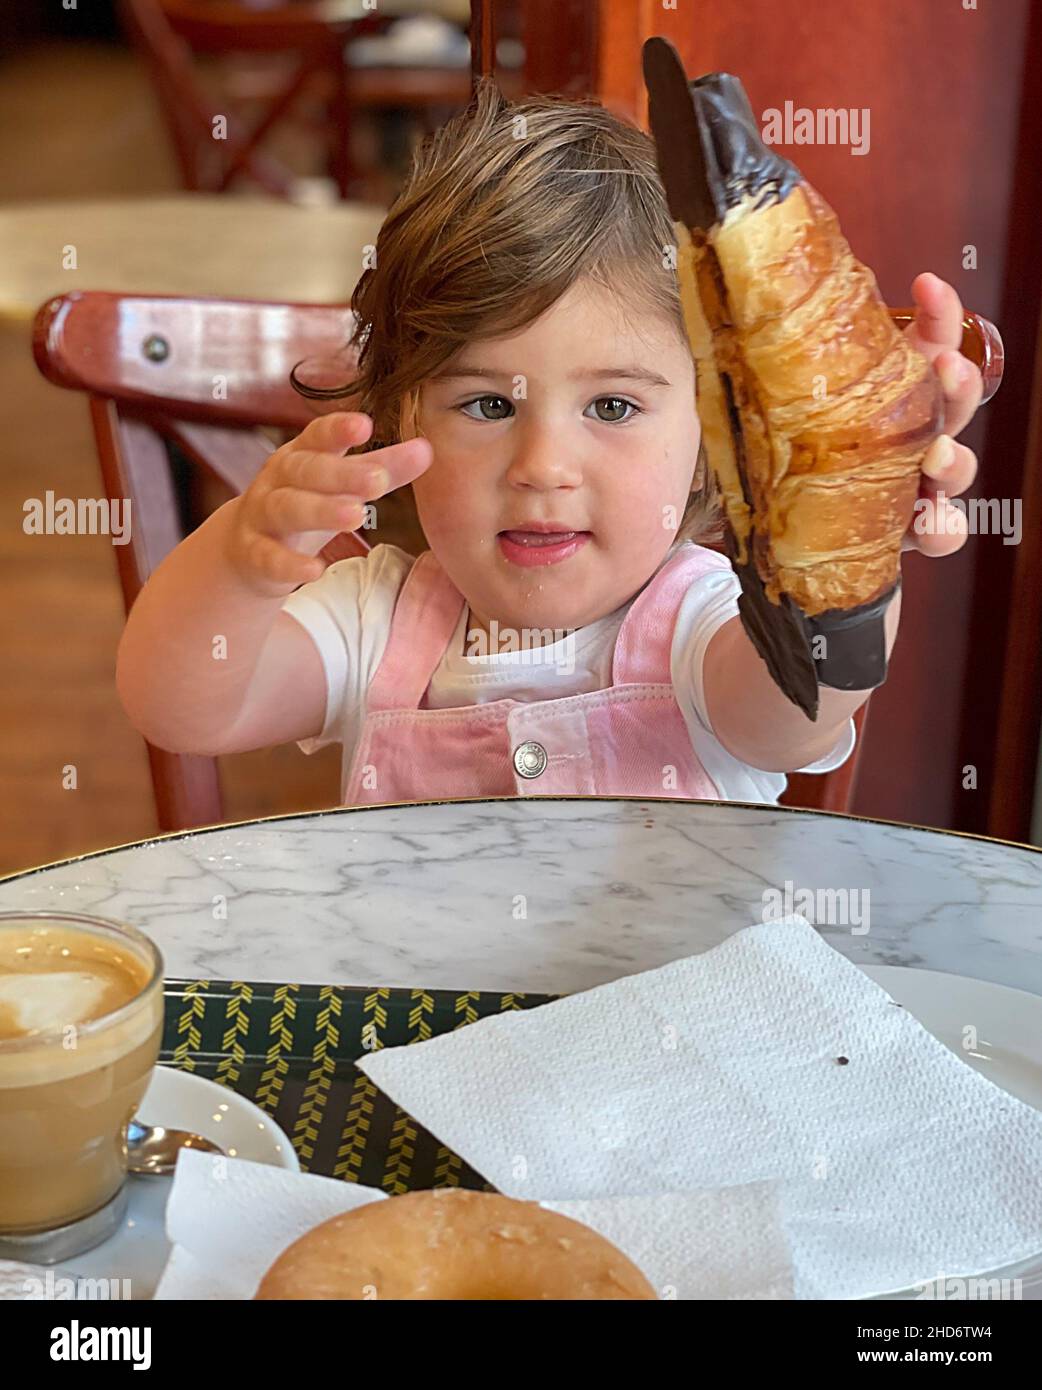 Girl picks up croissant with great appetite and eagerness. Stock Photo